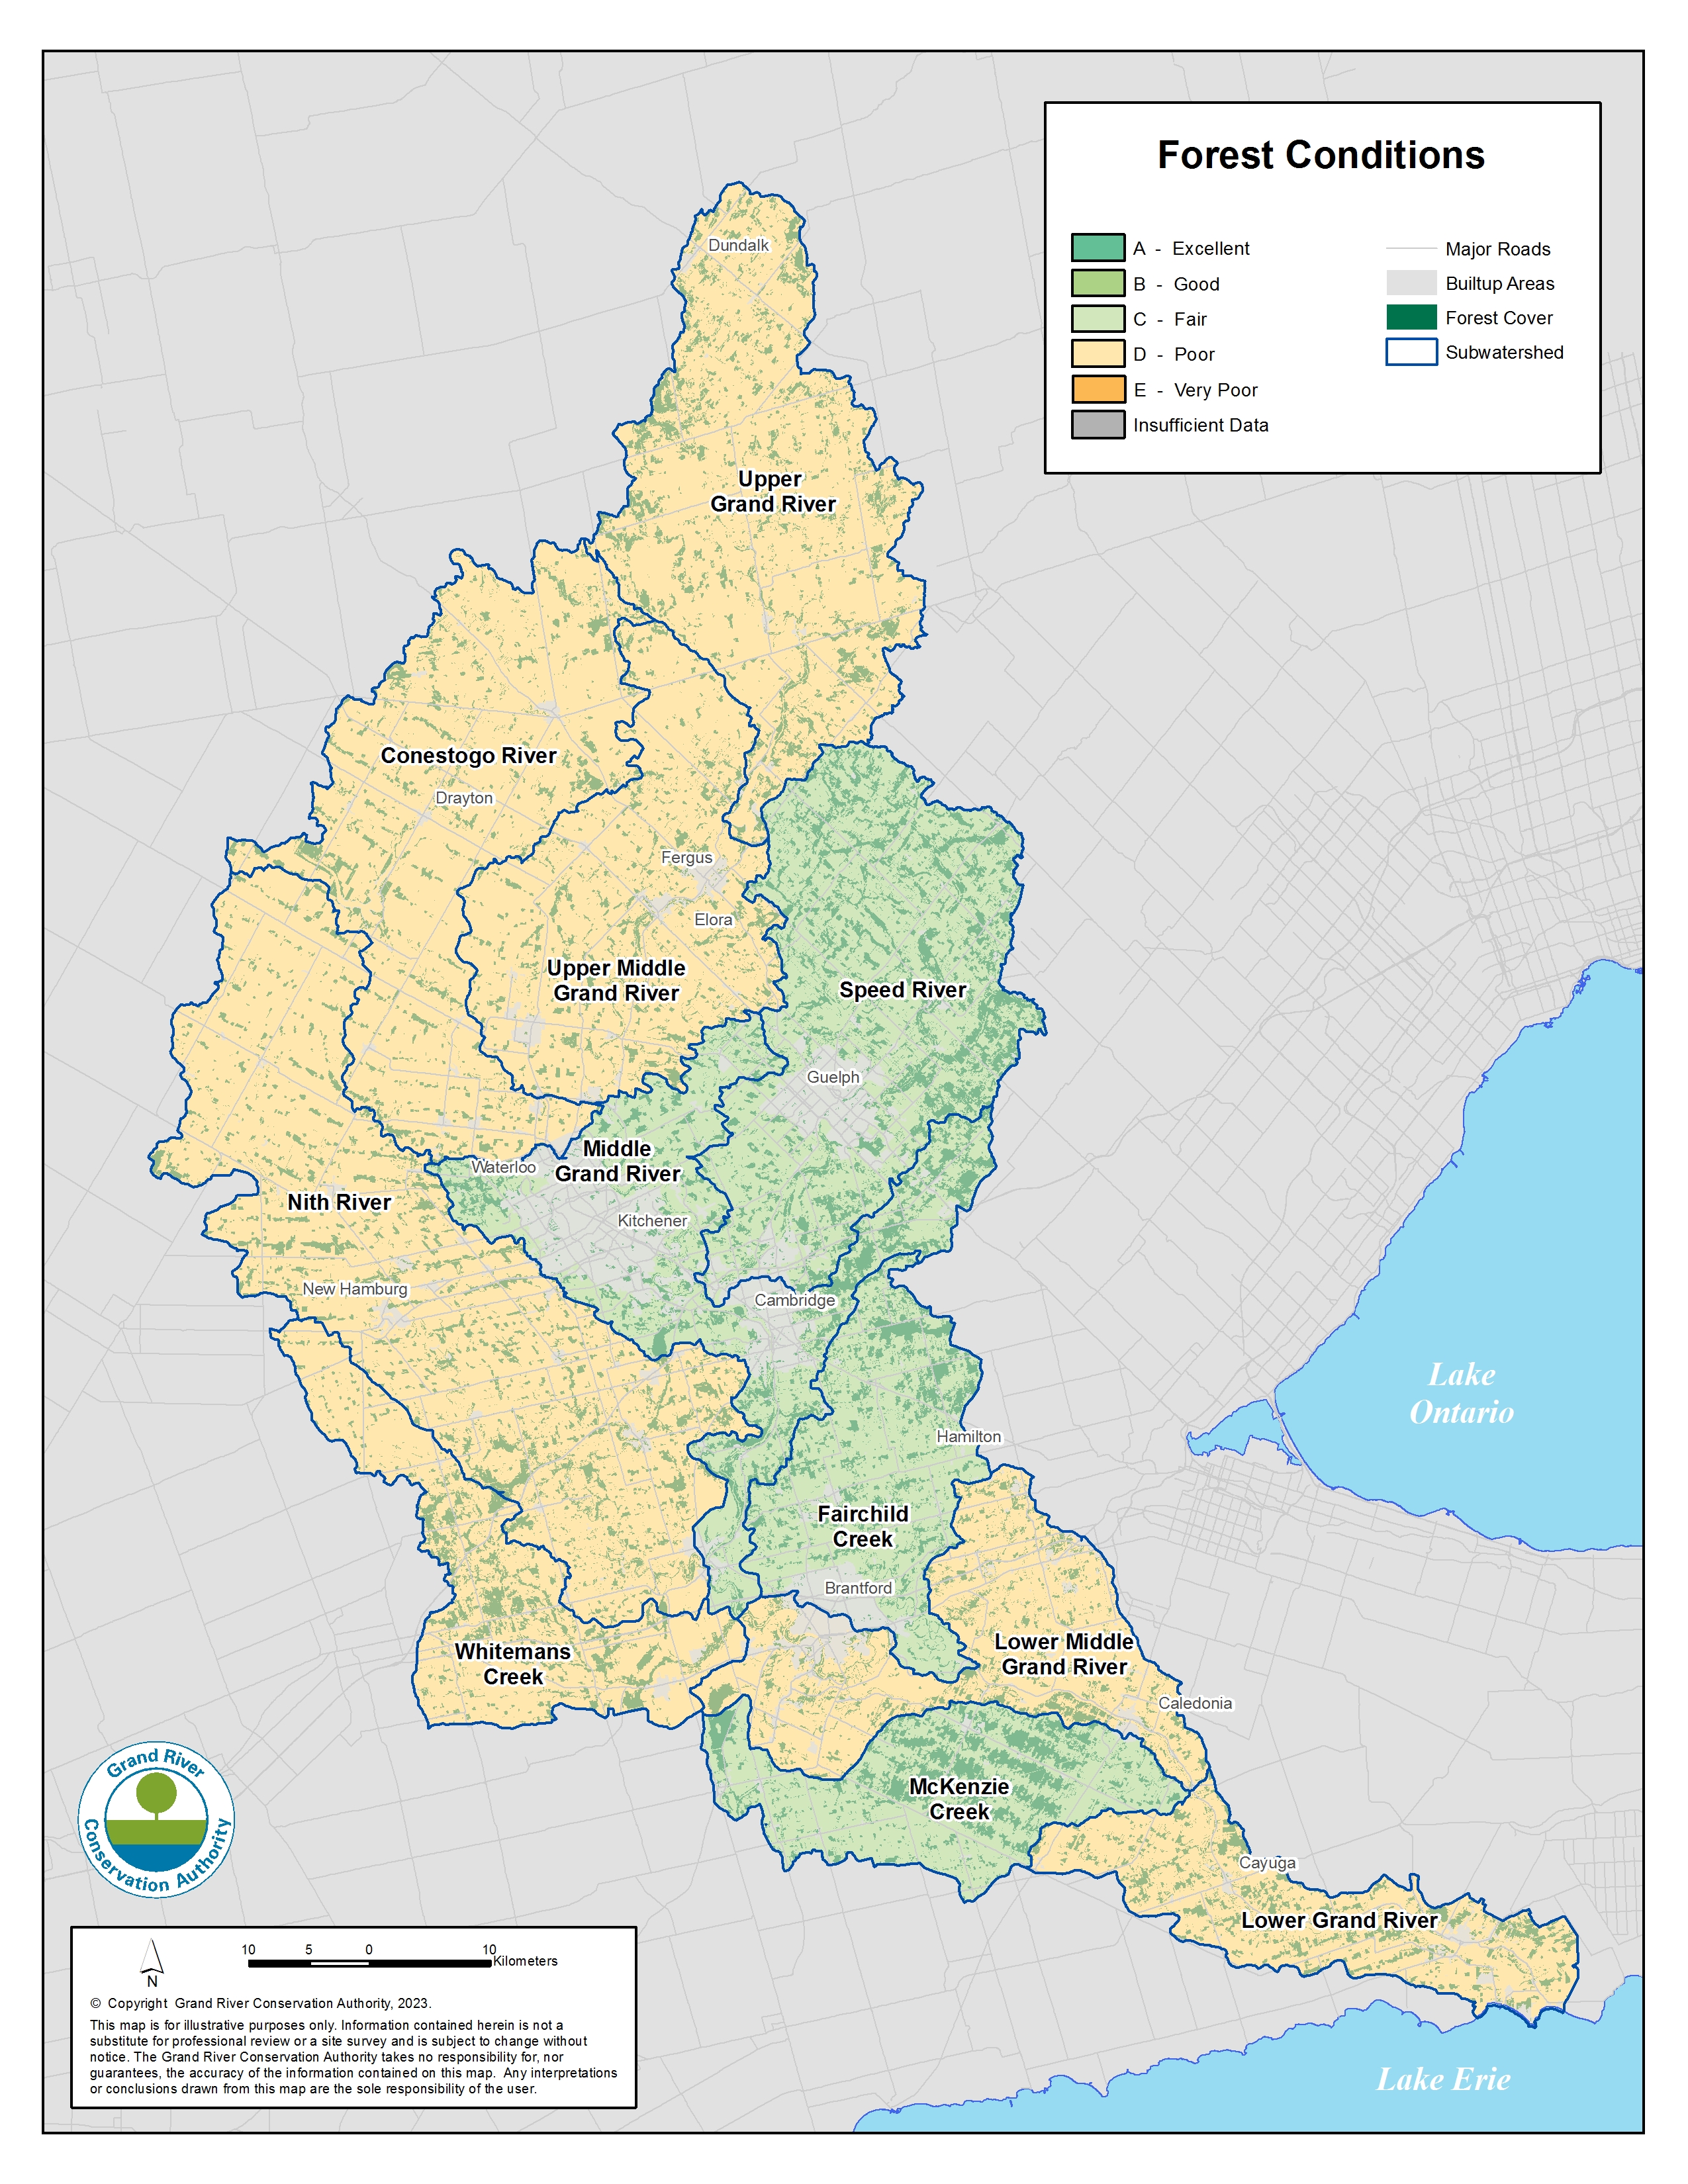 A map of letter grades for forest conditions. The Speed River, Middle Grand River, Fairchild Creek and McKenzie Creek subwatersheds have a C grade while all others have a D grade. 